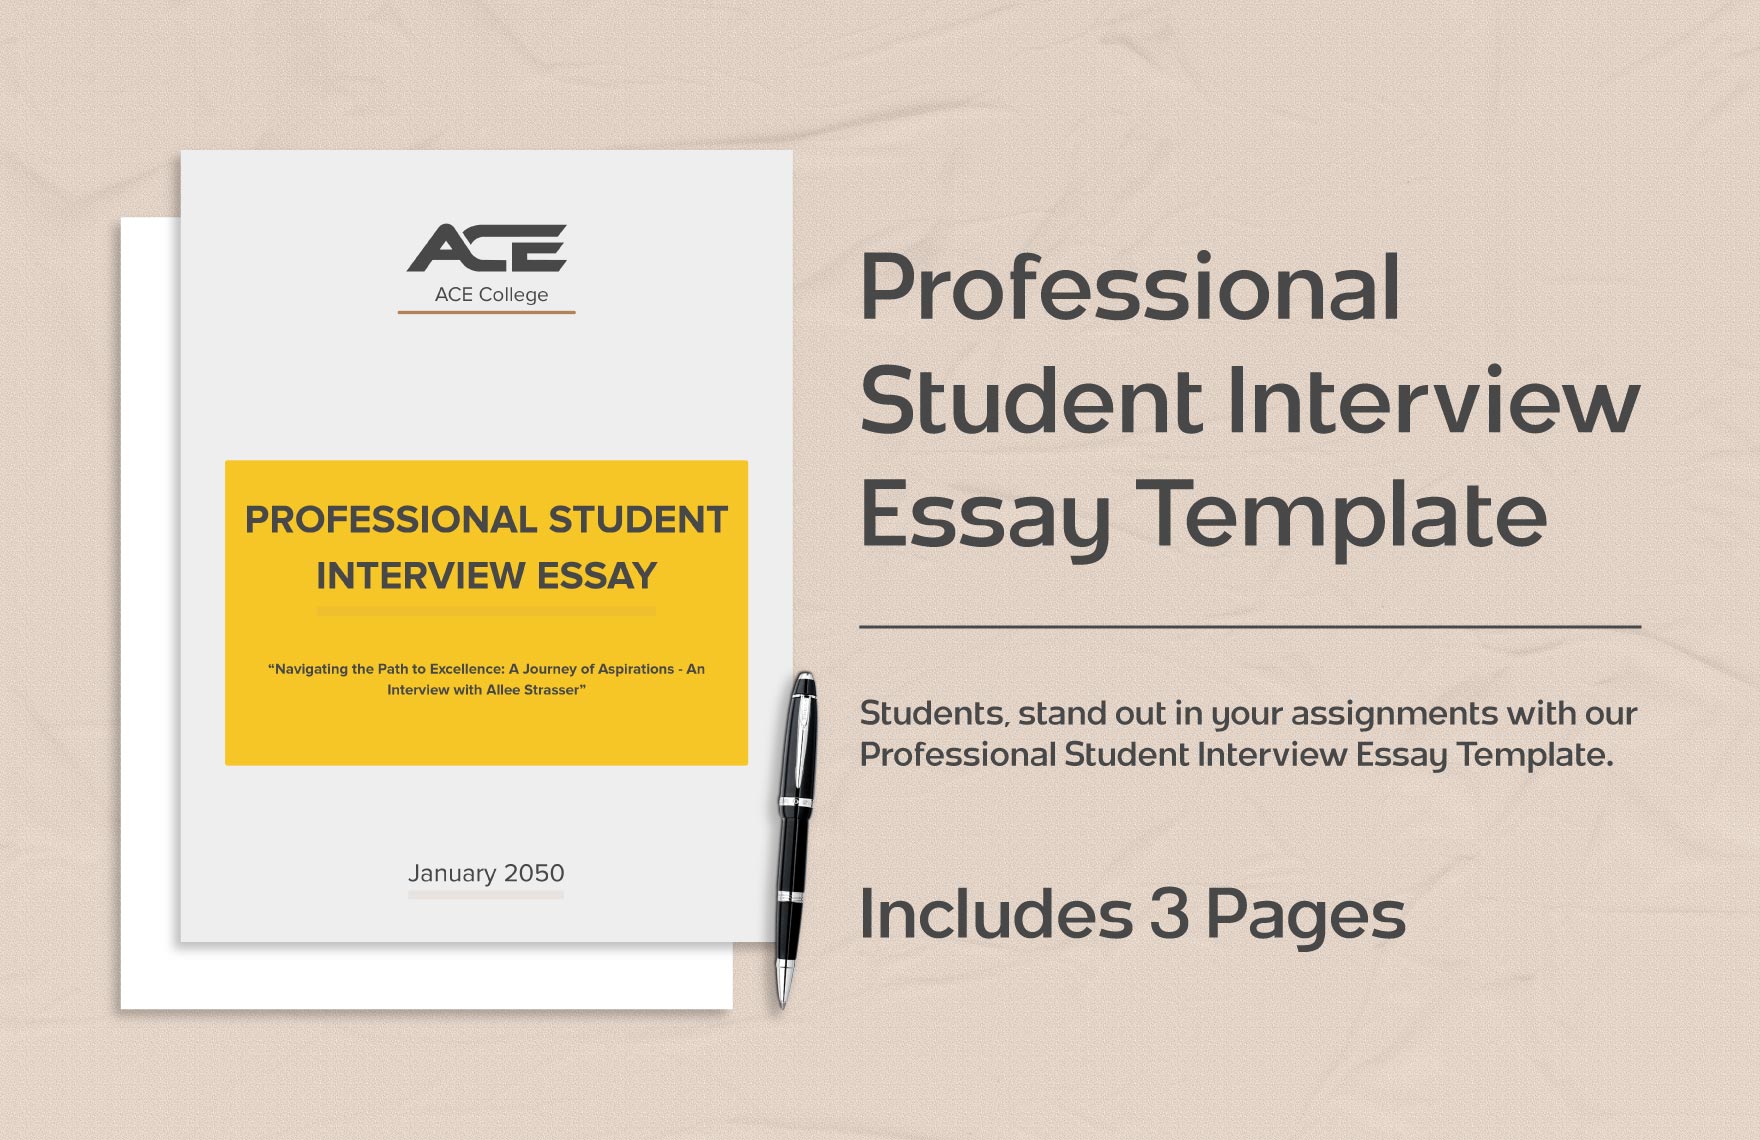 Professional Student Interview Essay Template